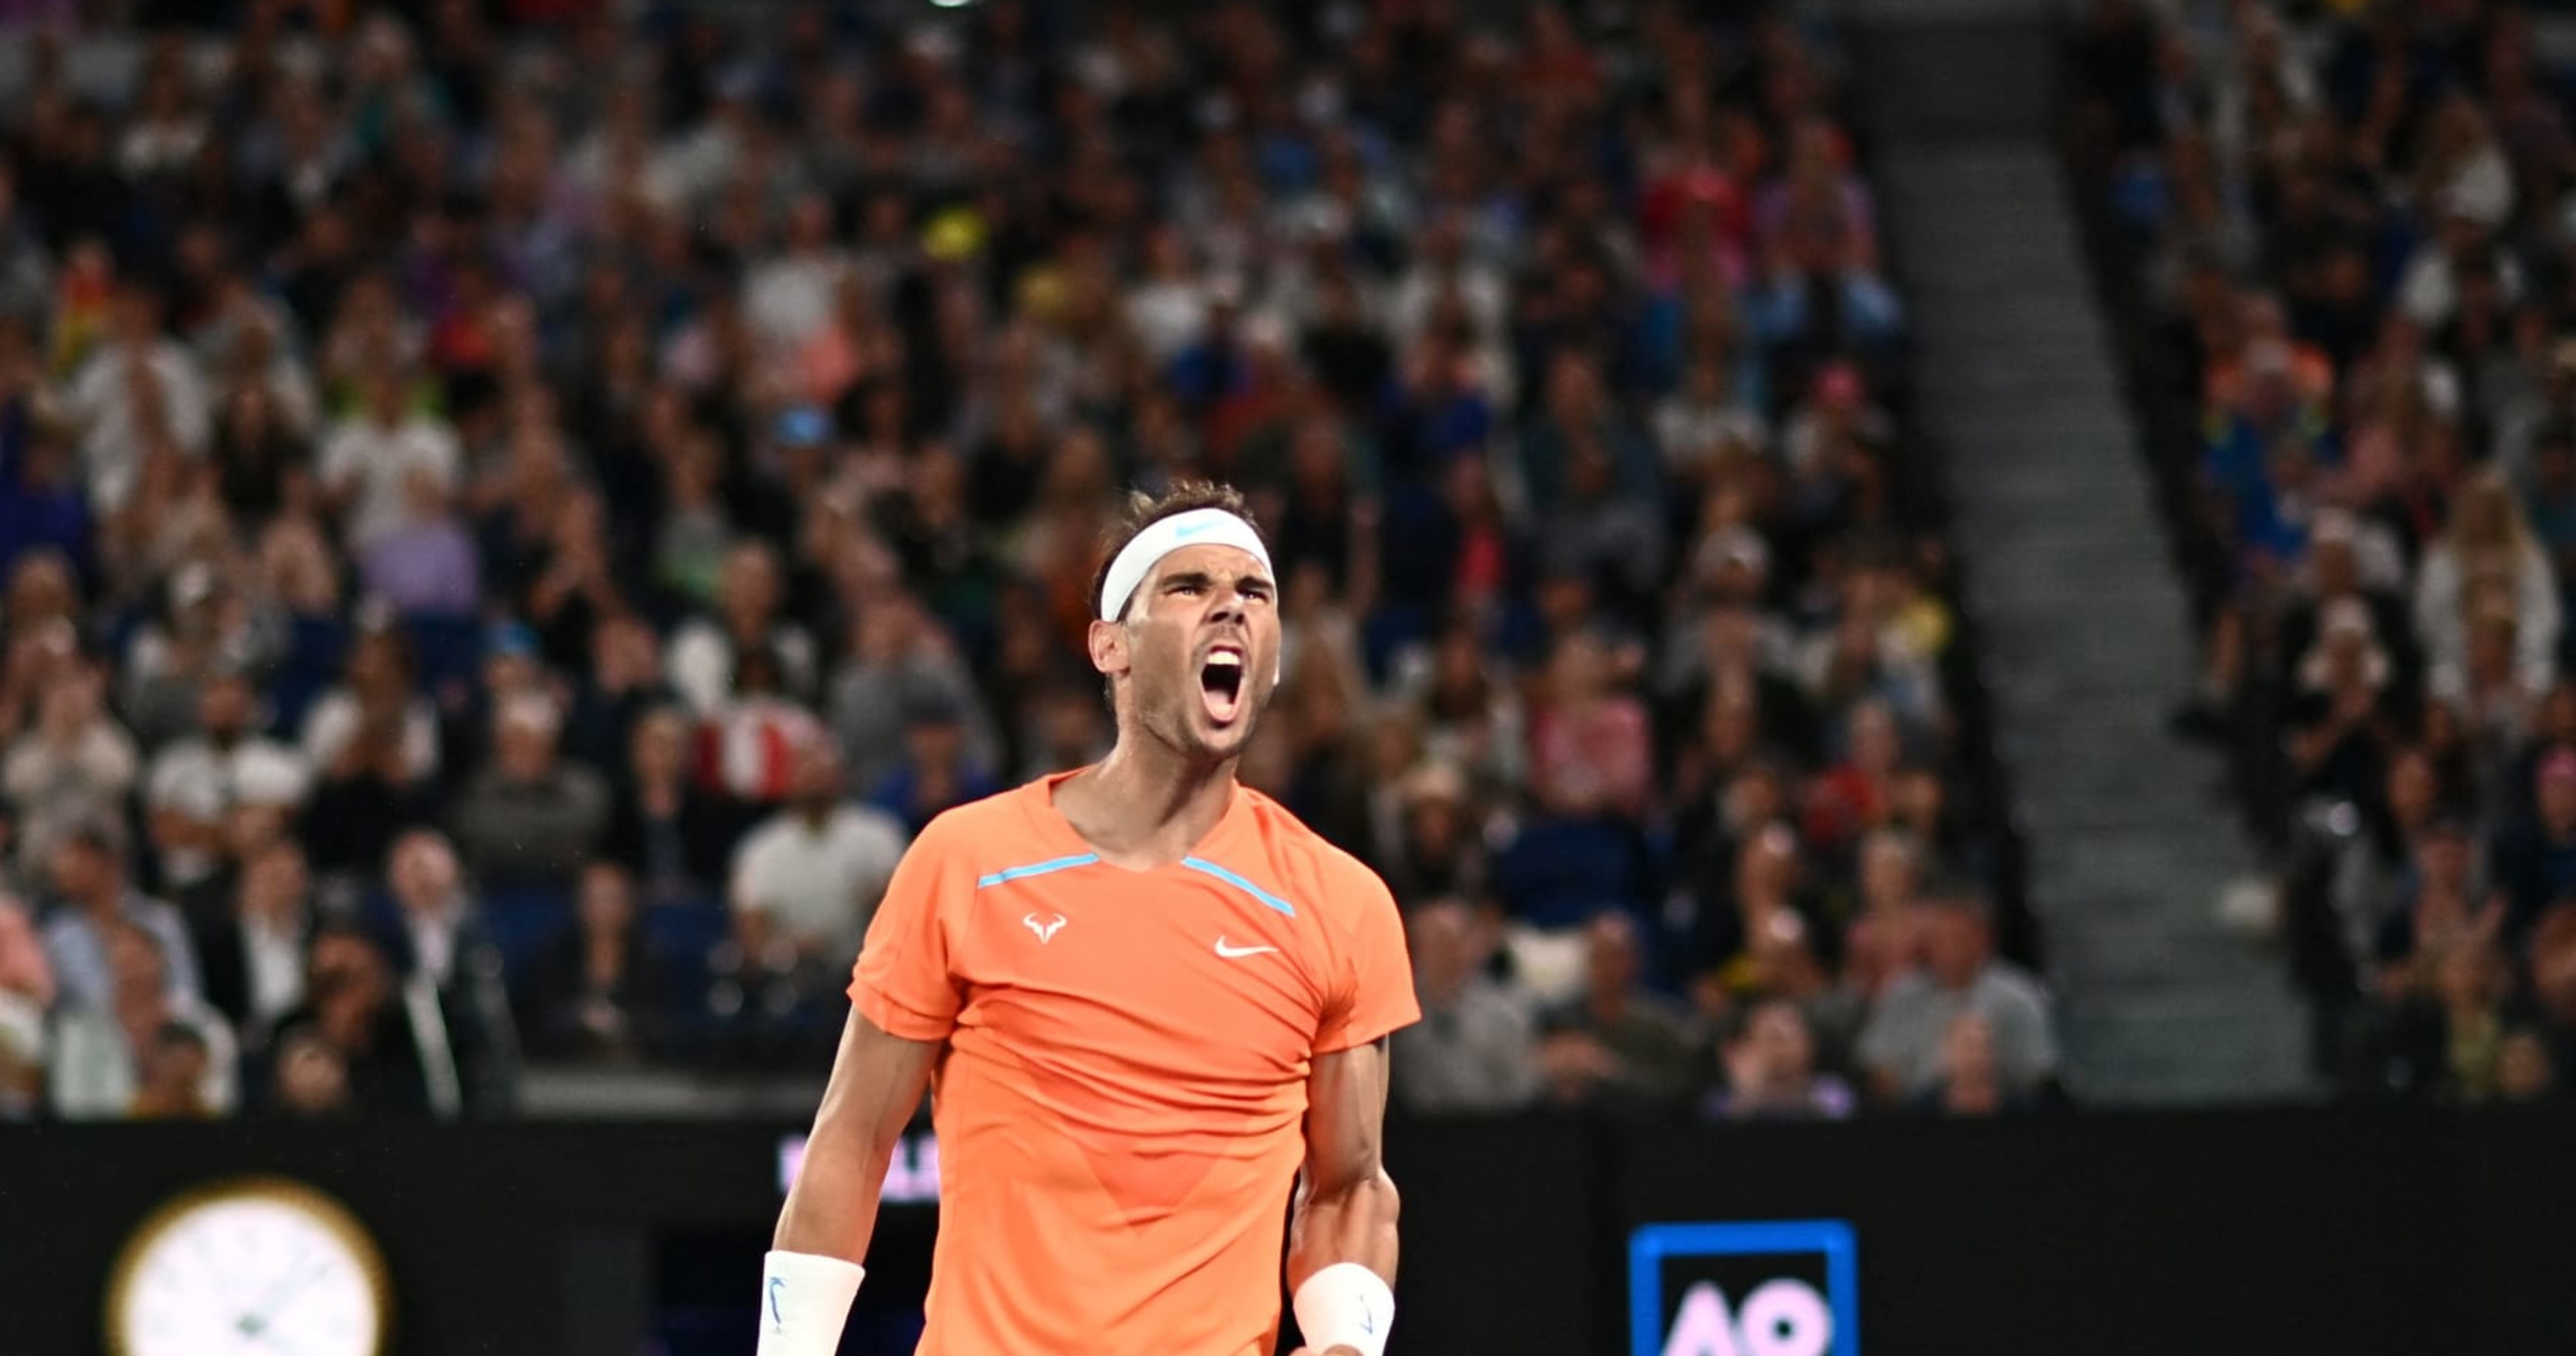 Profile of Rafa Nadal who will miss the French Open